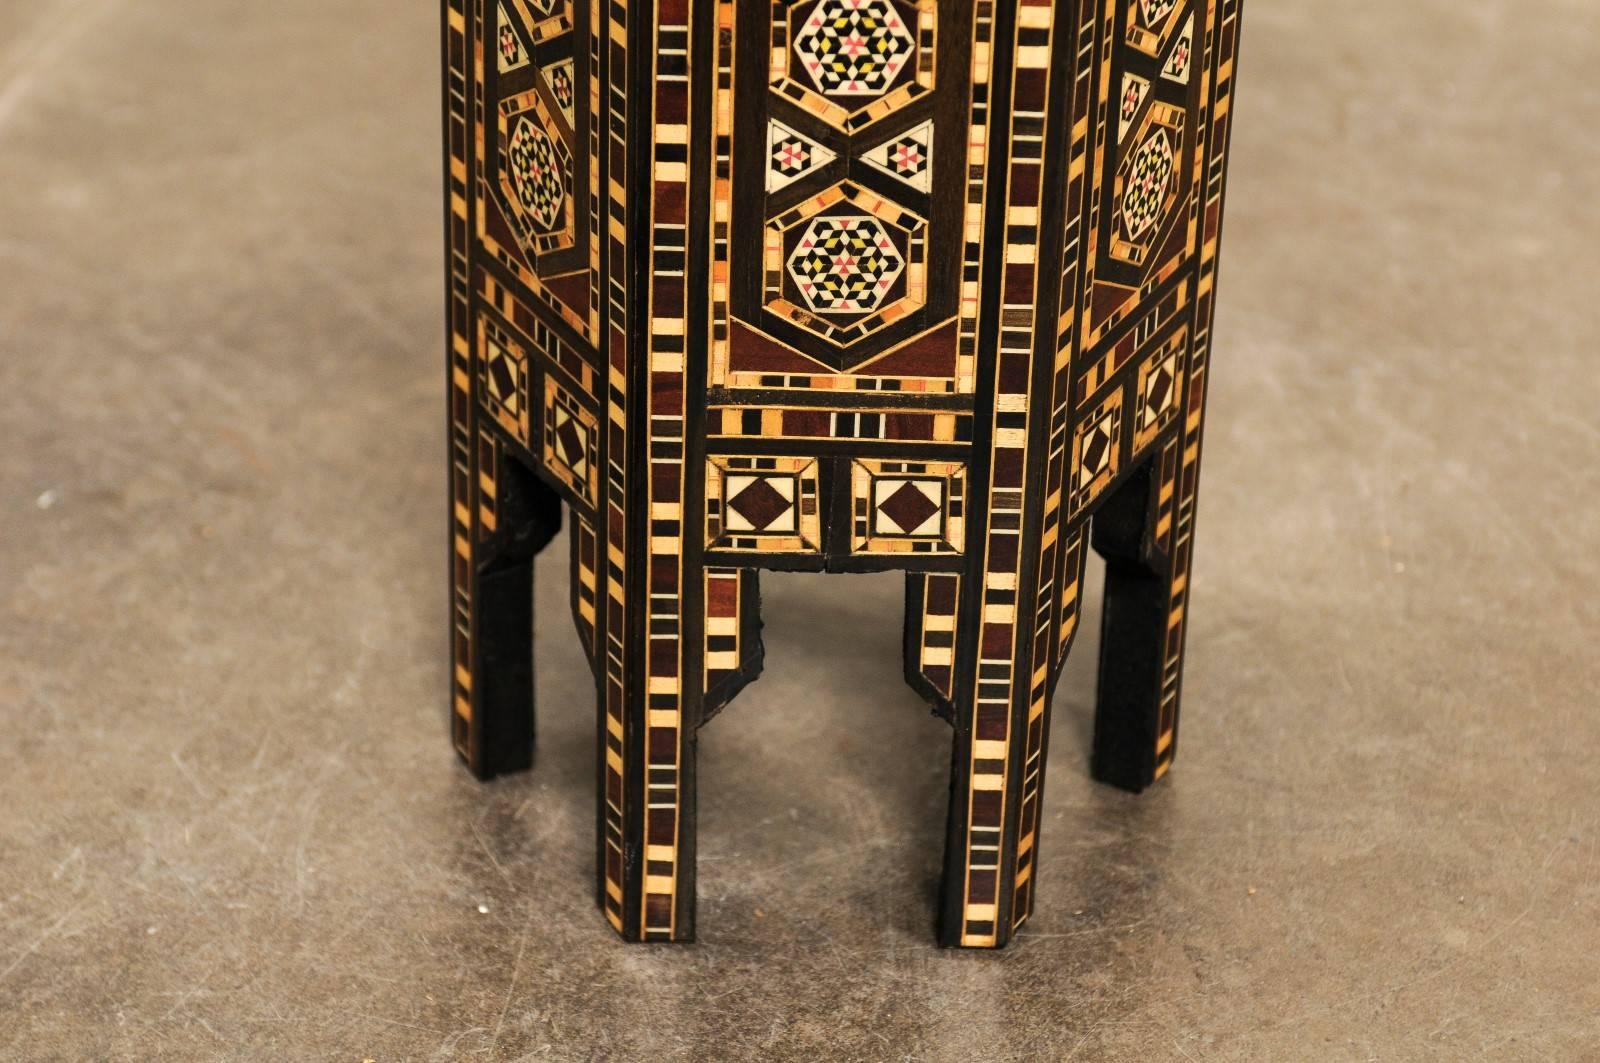 Inlaid Moroccan Petite Size Drinks Table with Wood and Bone Inlay, Mid-Century 1